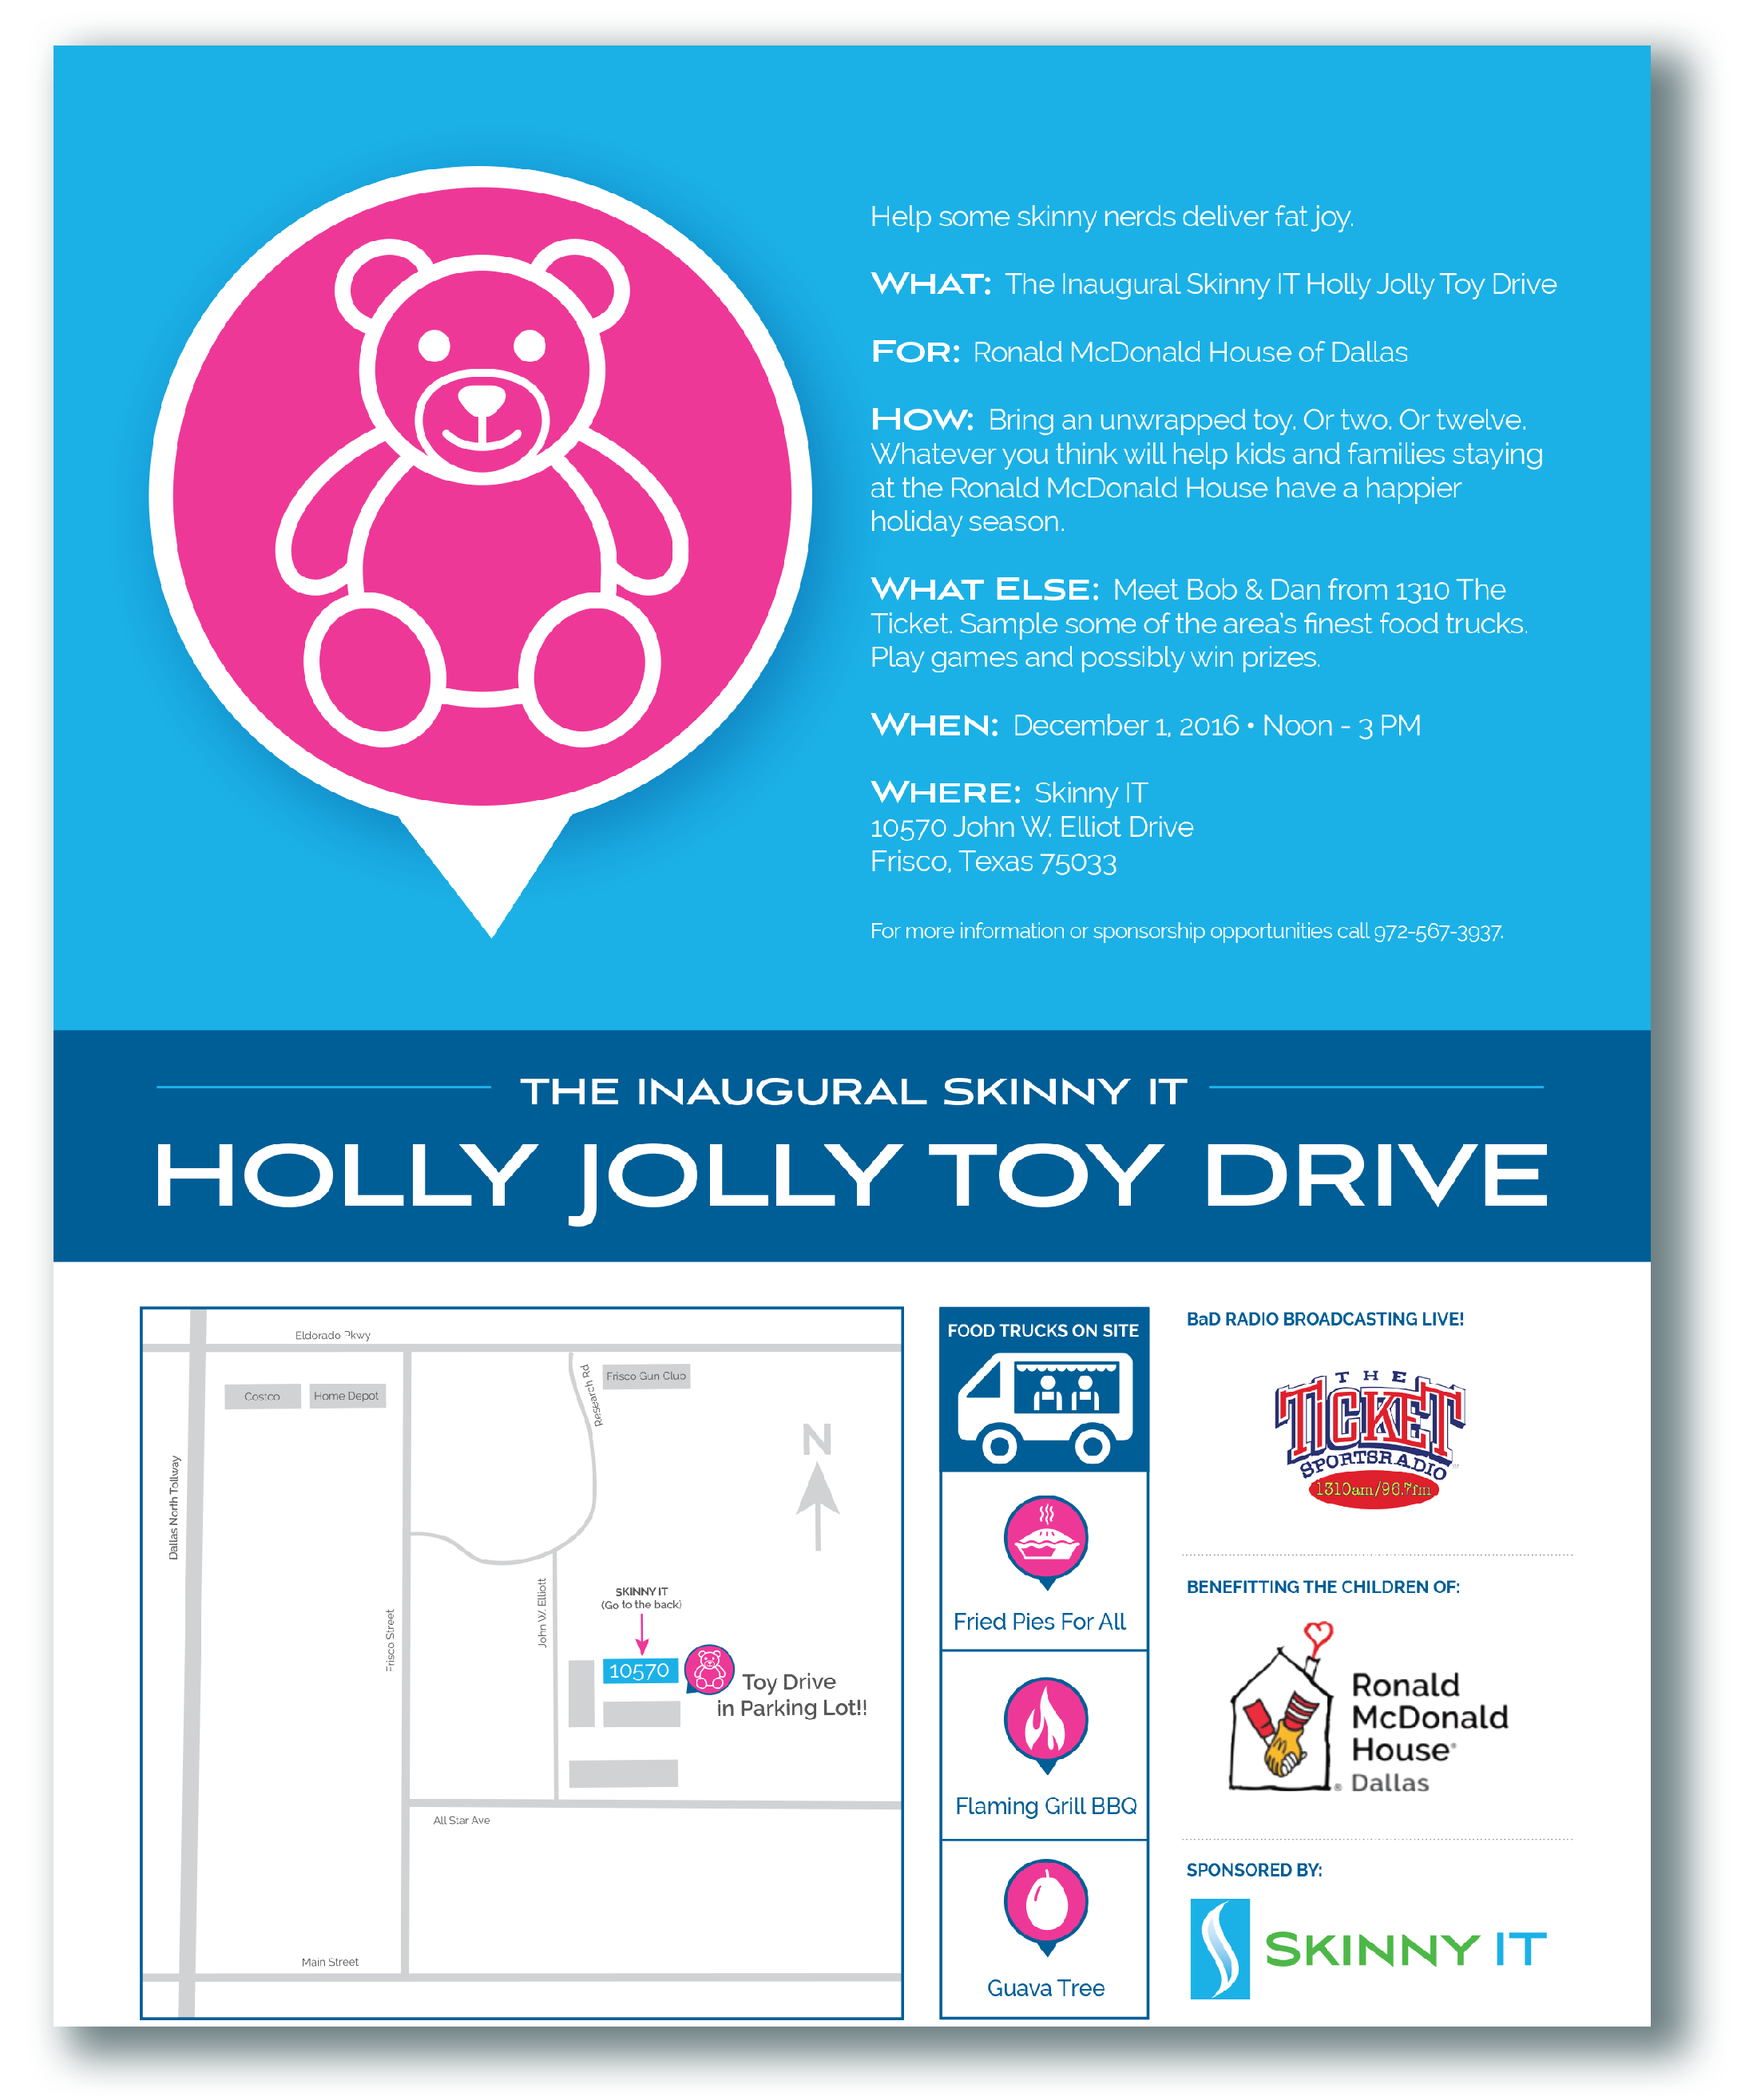 Skinny IT Holly Jolly Toy Drive